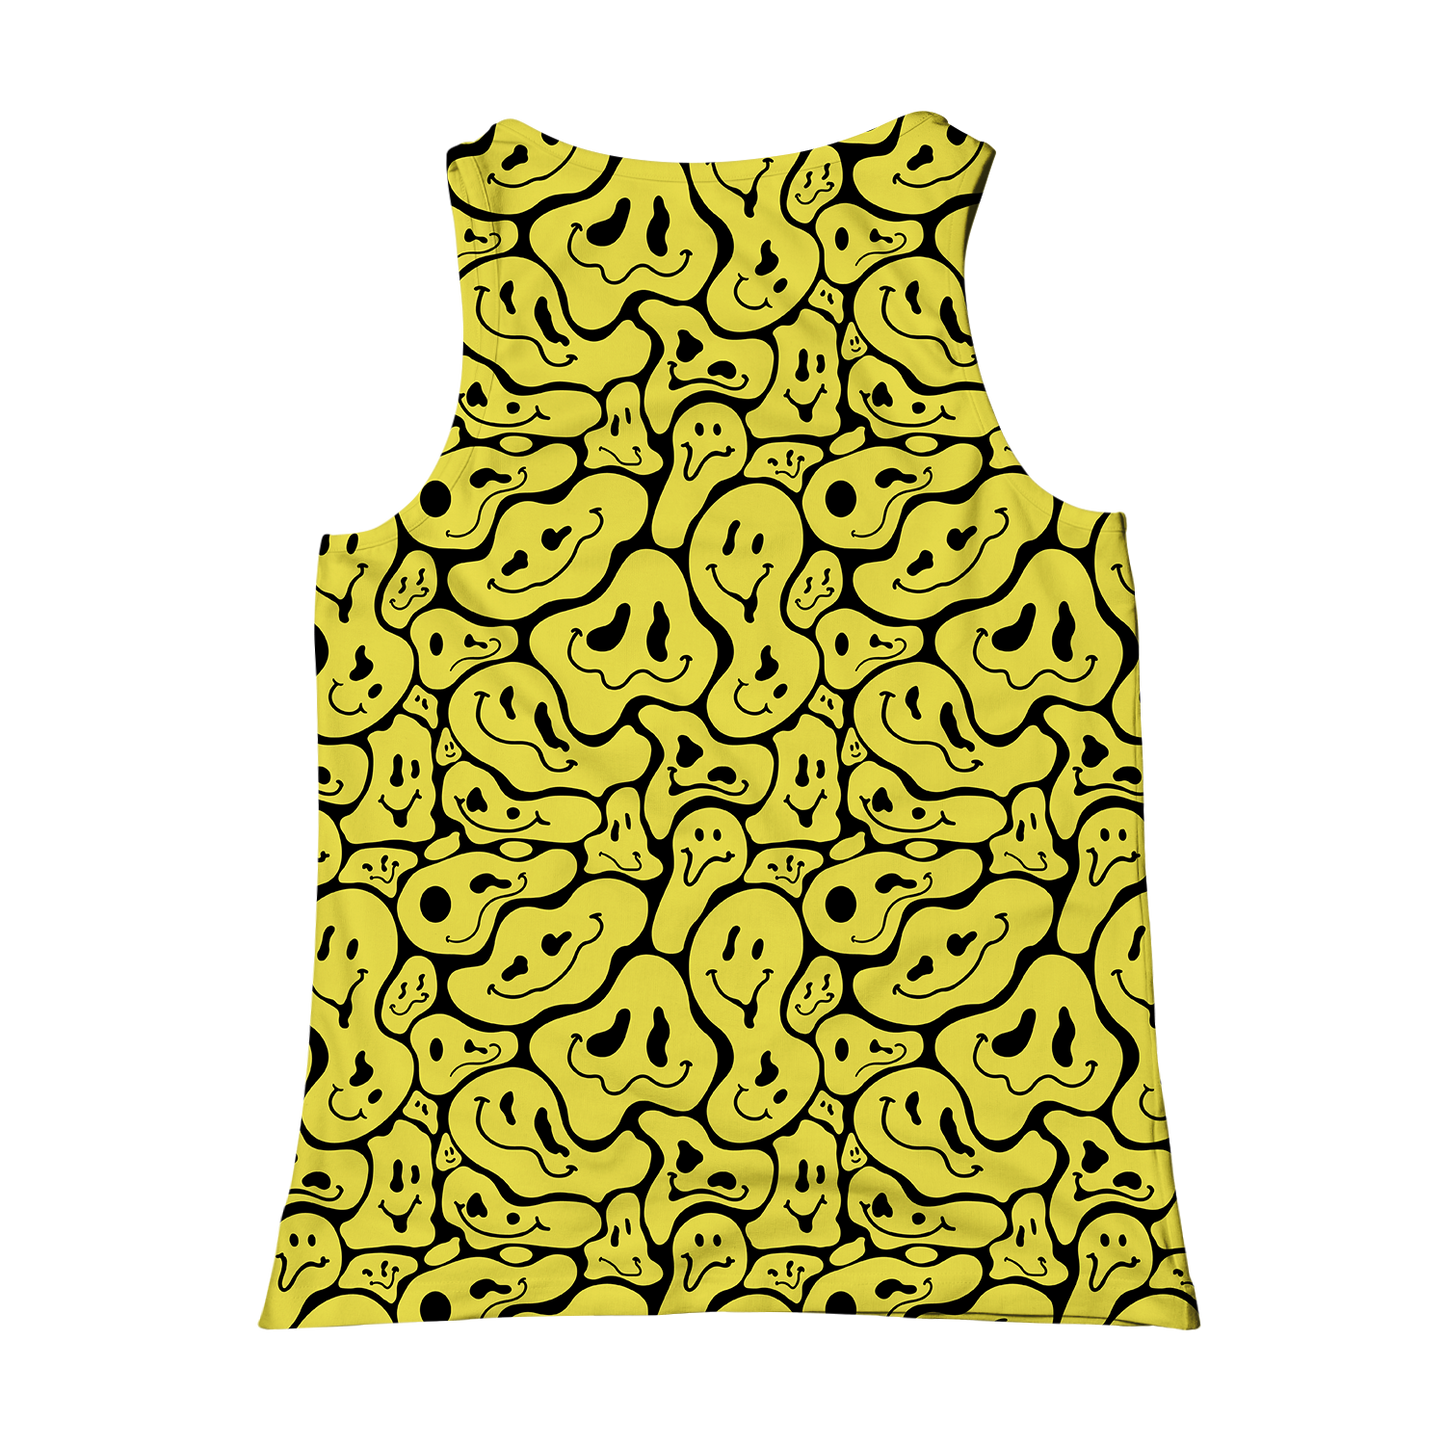 Trippy Smiley Faces All Over Print Unisex Tank Top